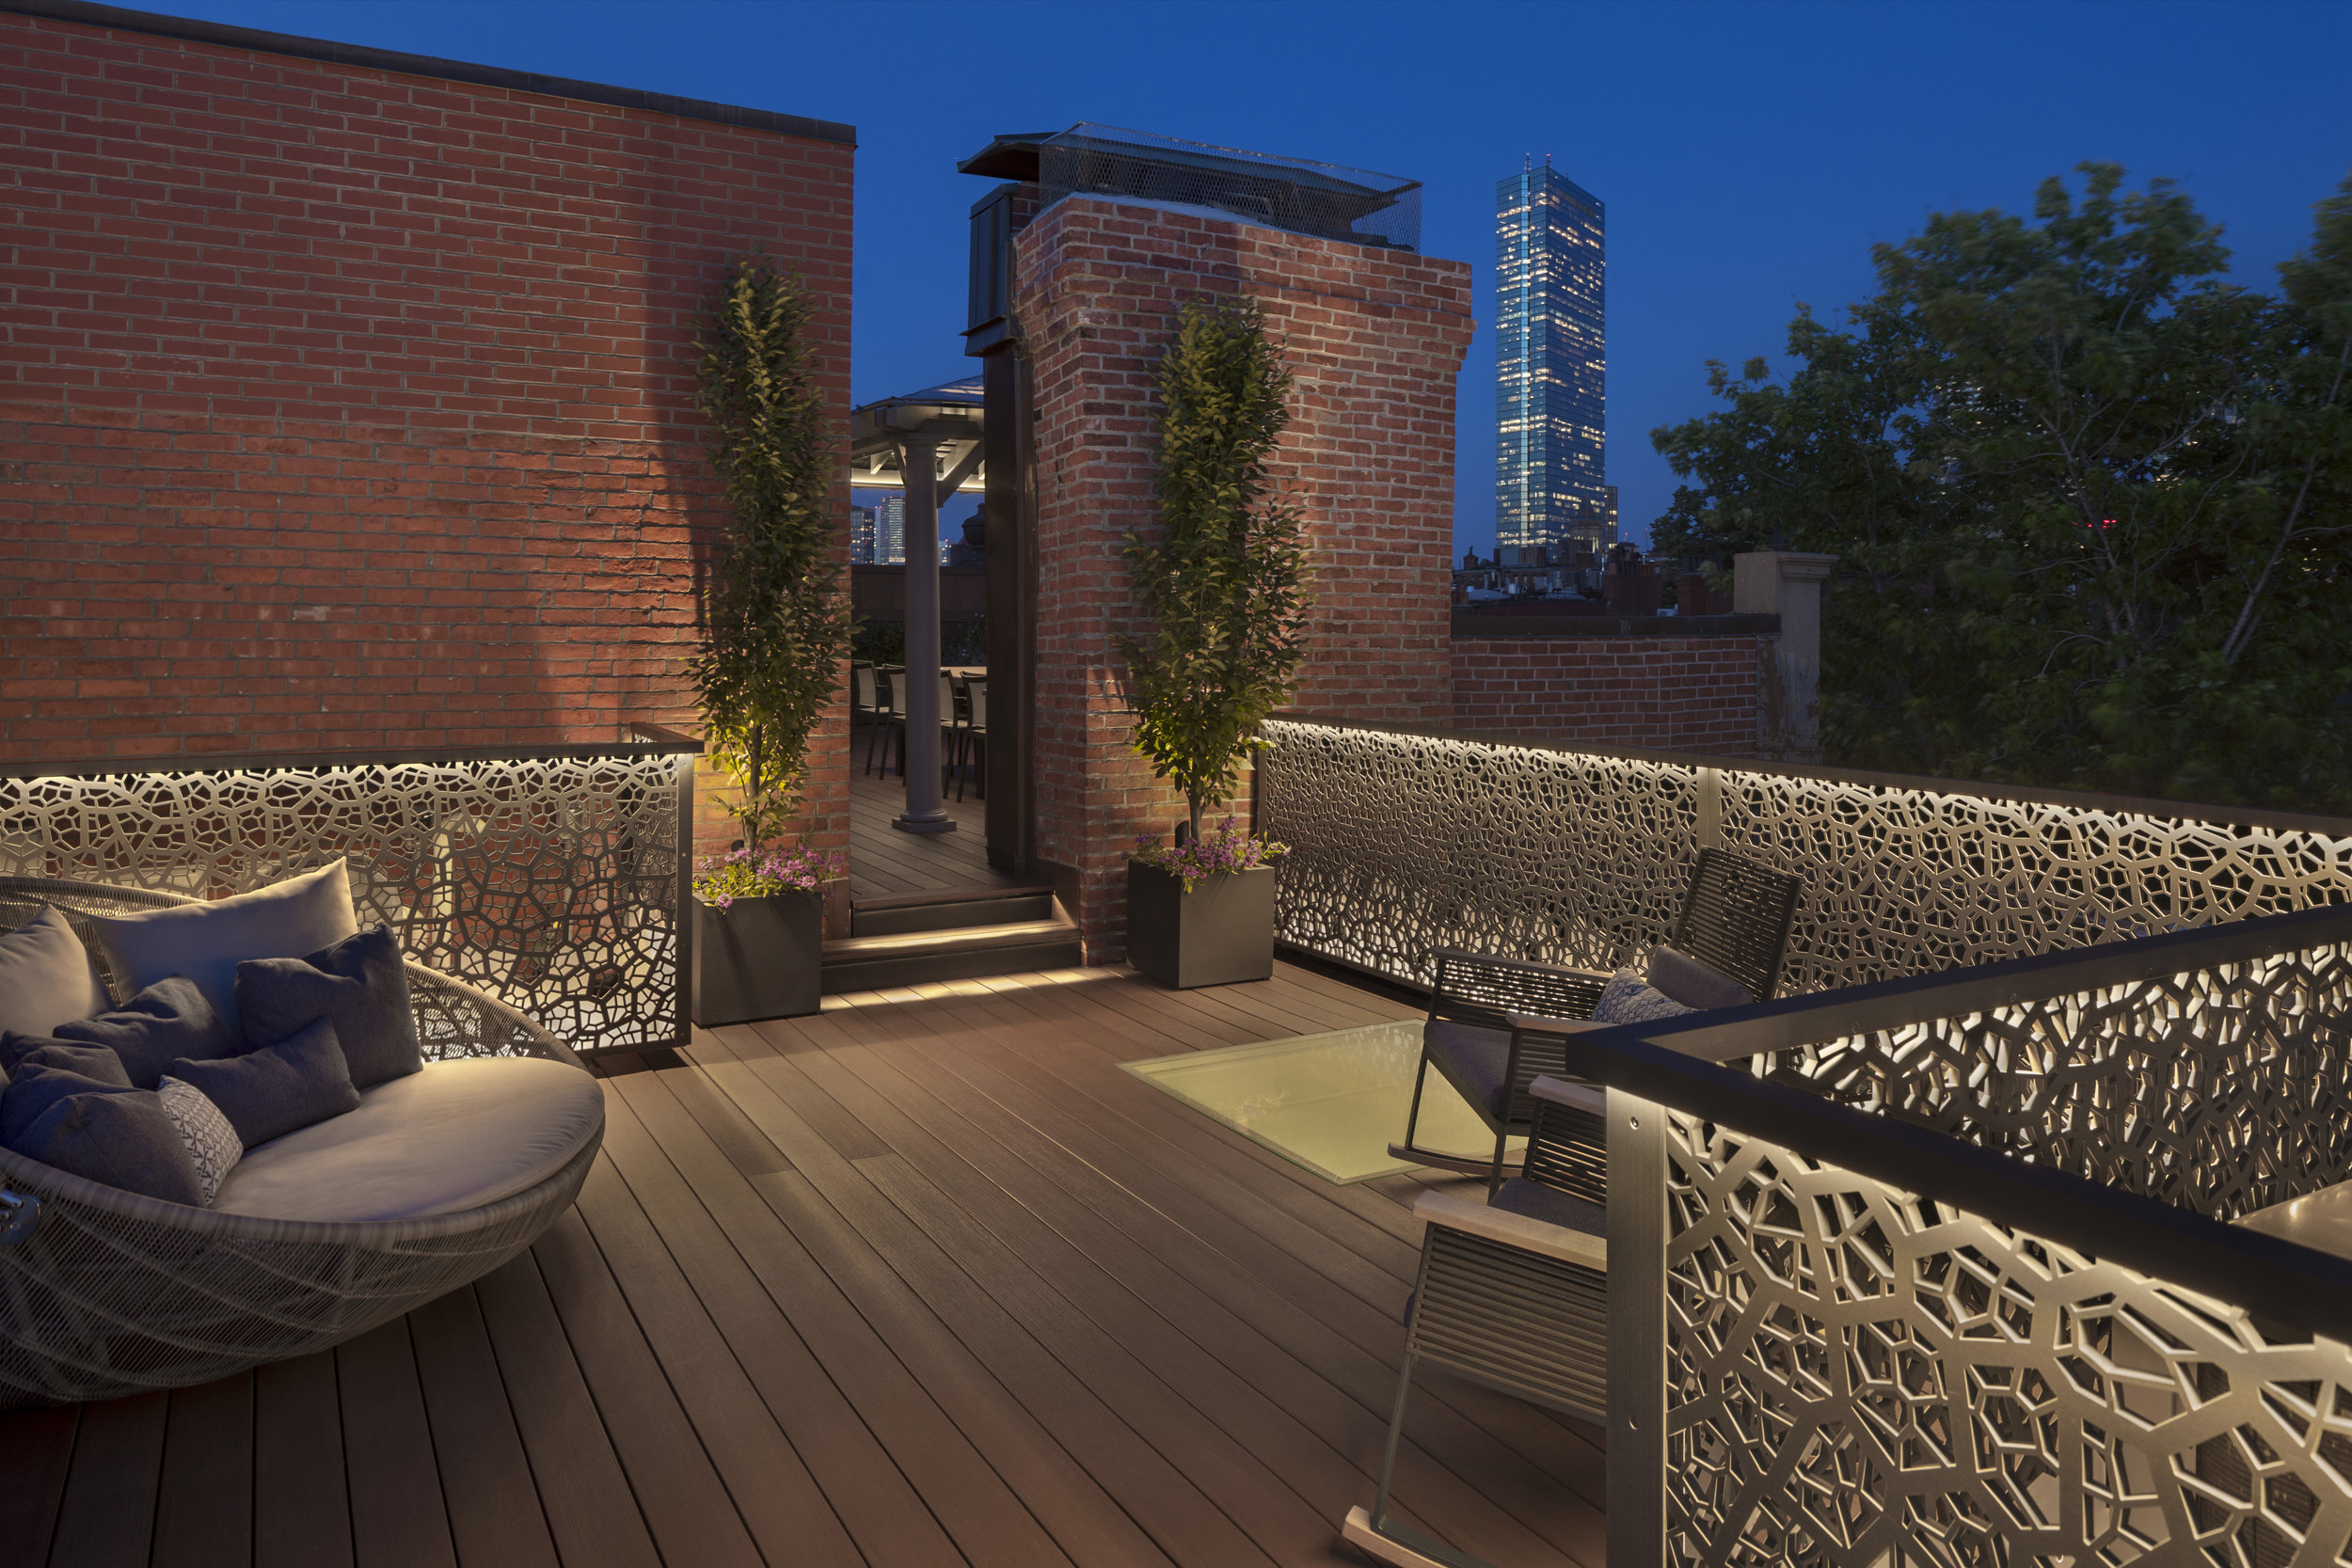  The railings help screen roof utilities and define this seating area. 